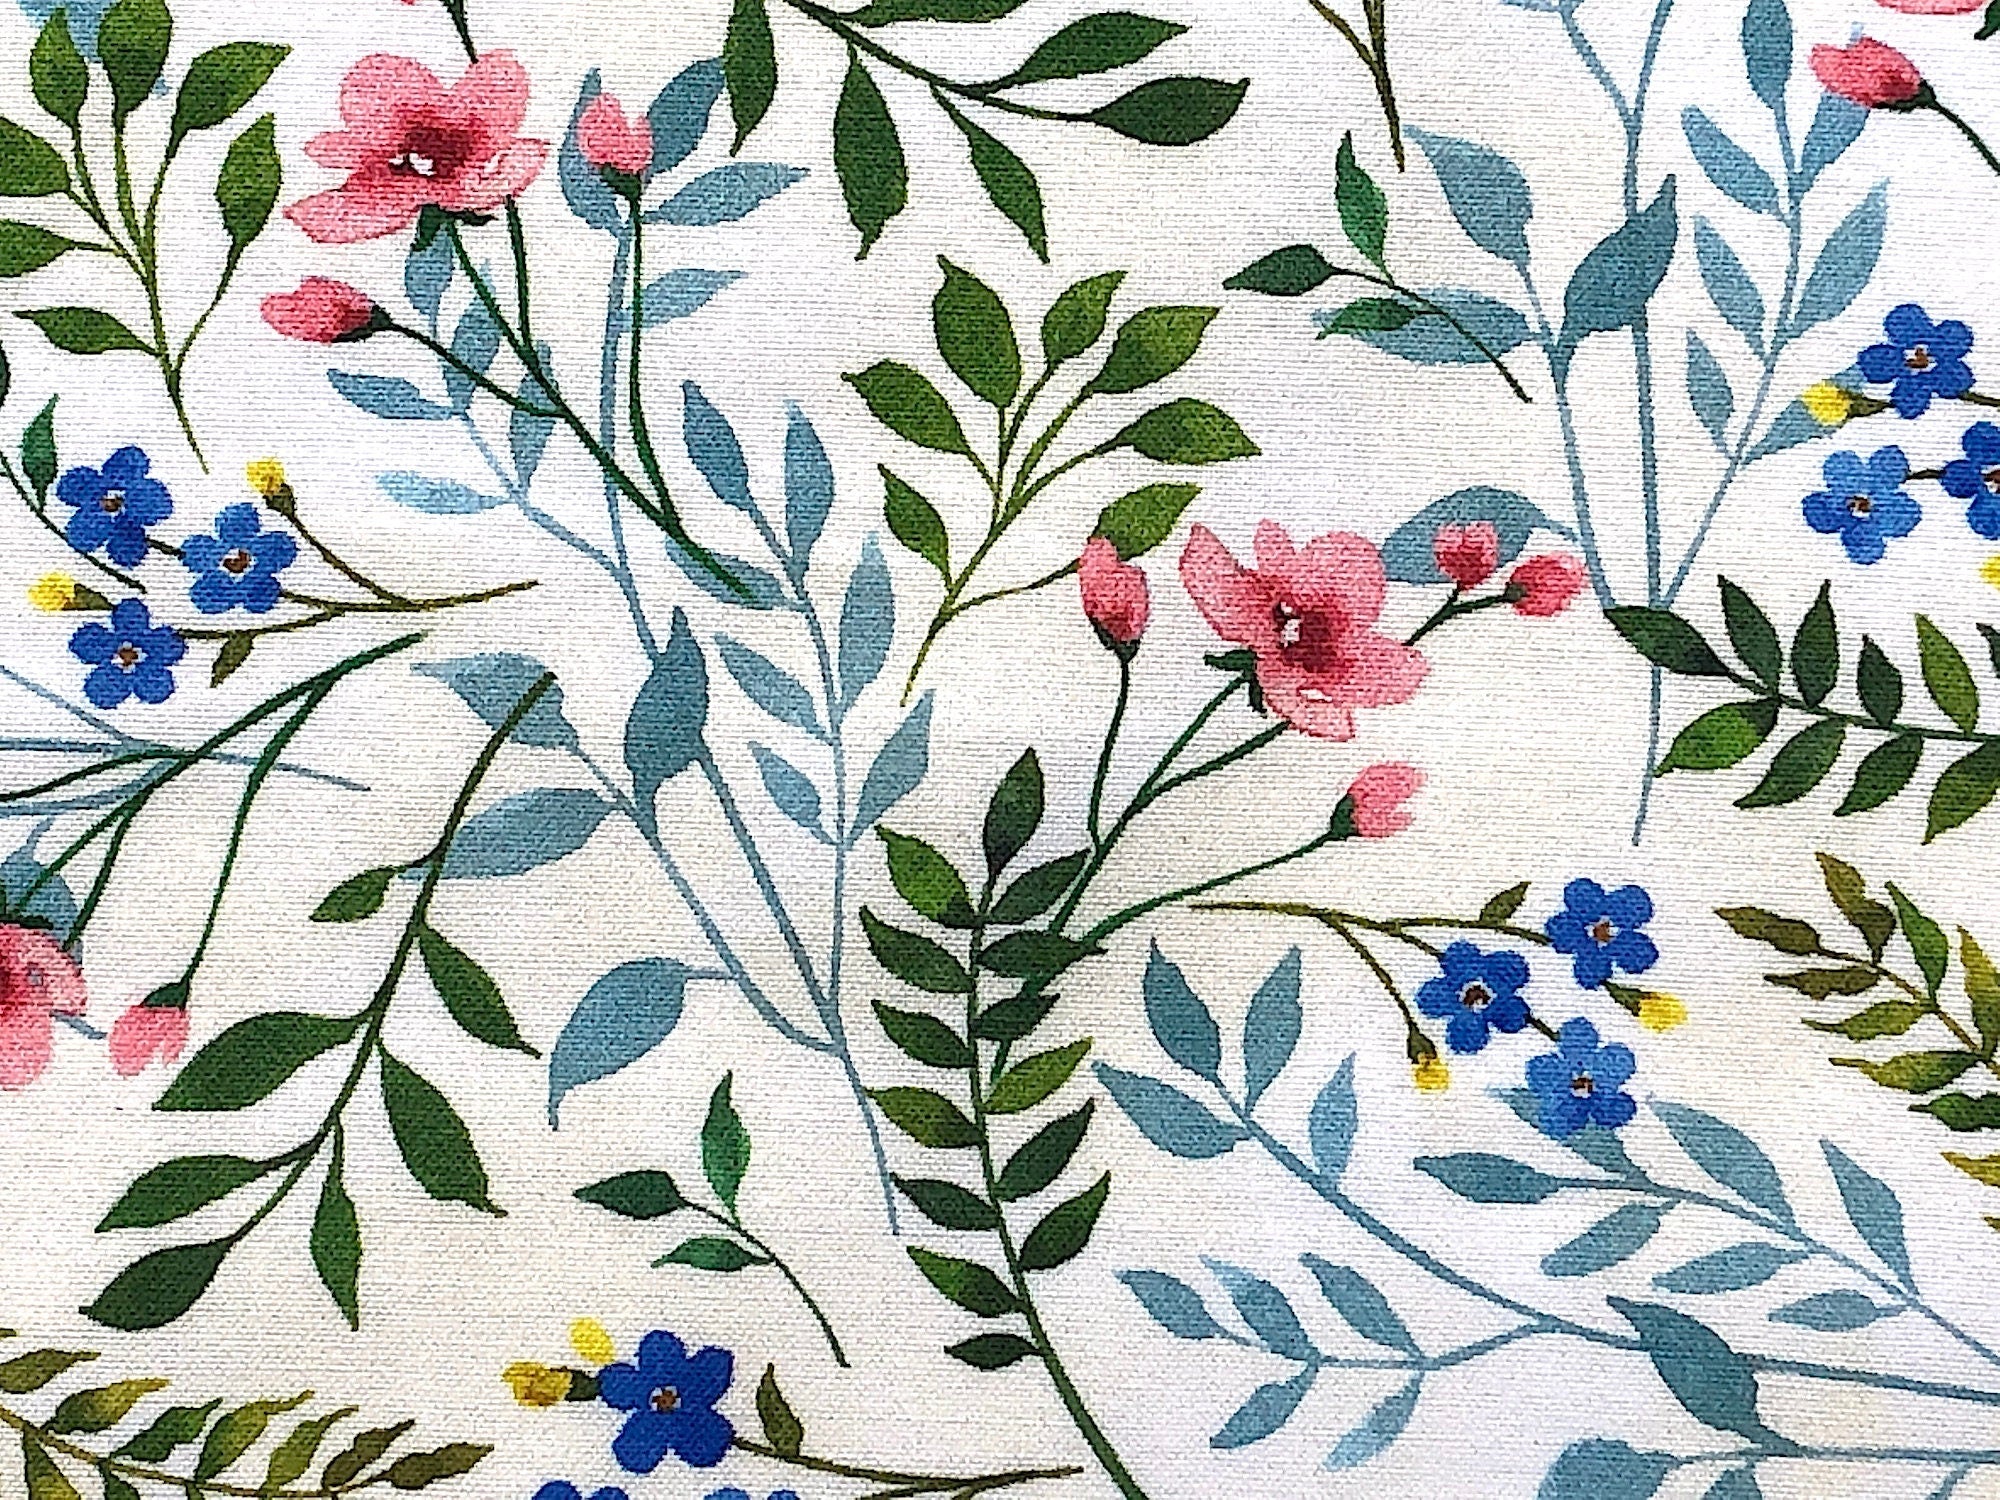 This pretty fabric is one from the Wildflower Farm Collection. Artist Jane Maday focuses on wildflowers in this collection. The colors are soft and cozy. This design has Pink, Blue, & Yellow Wildflowers - on a light Background.